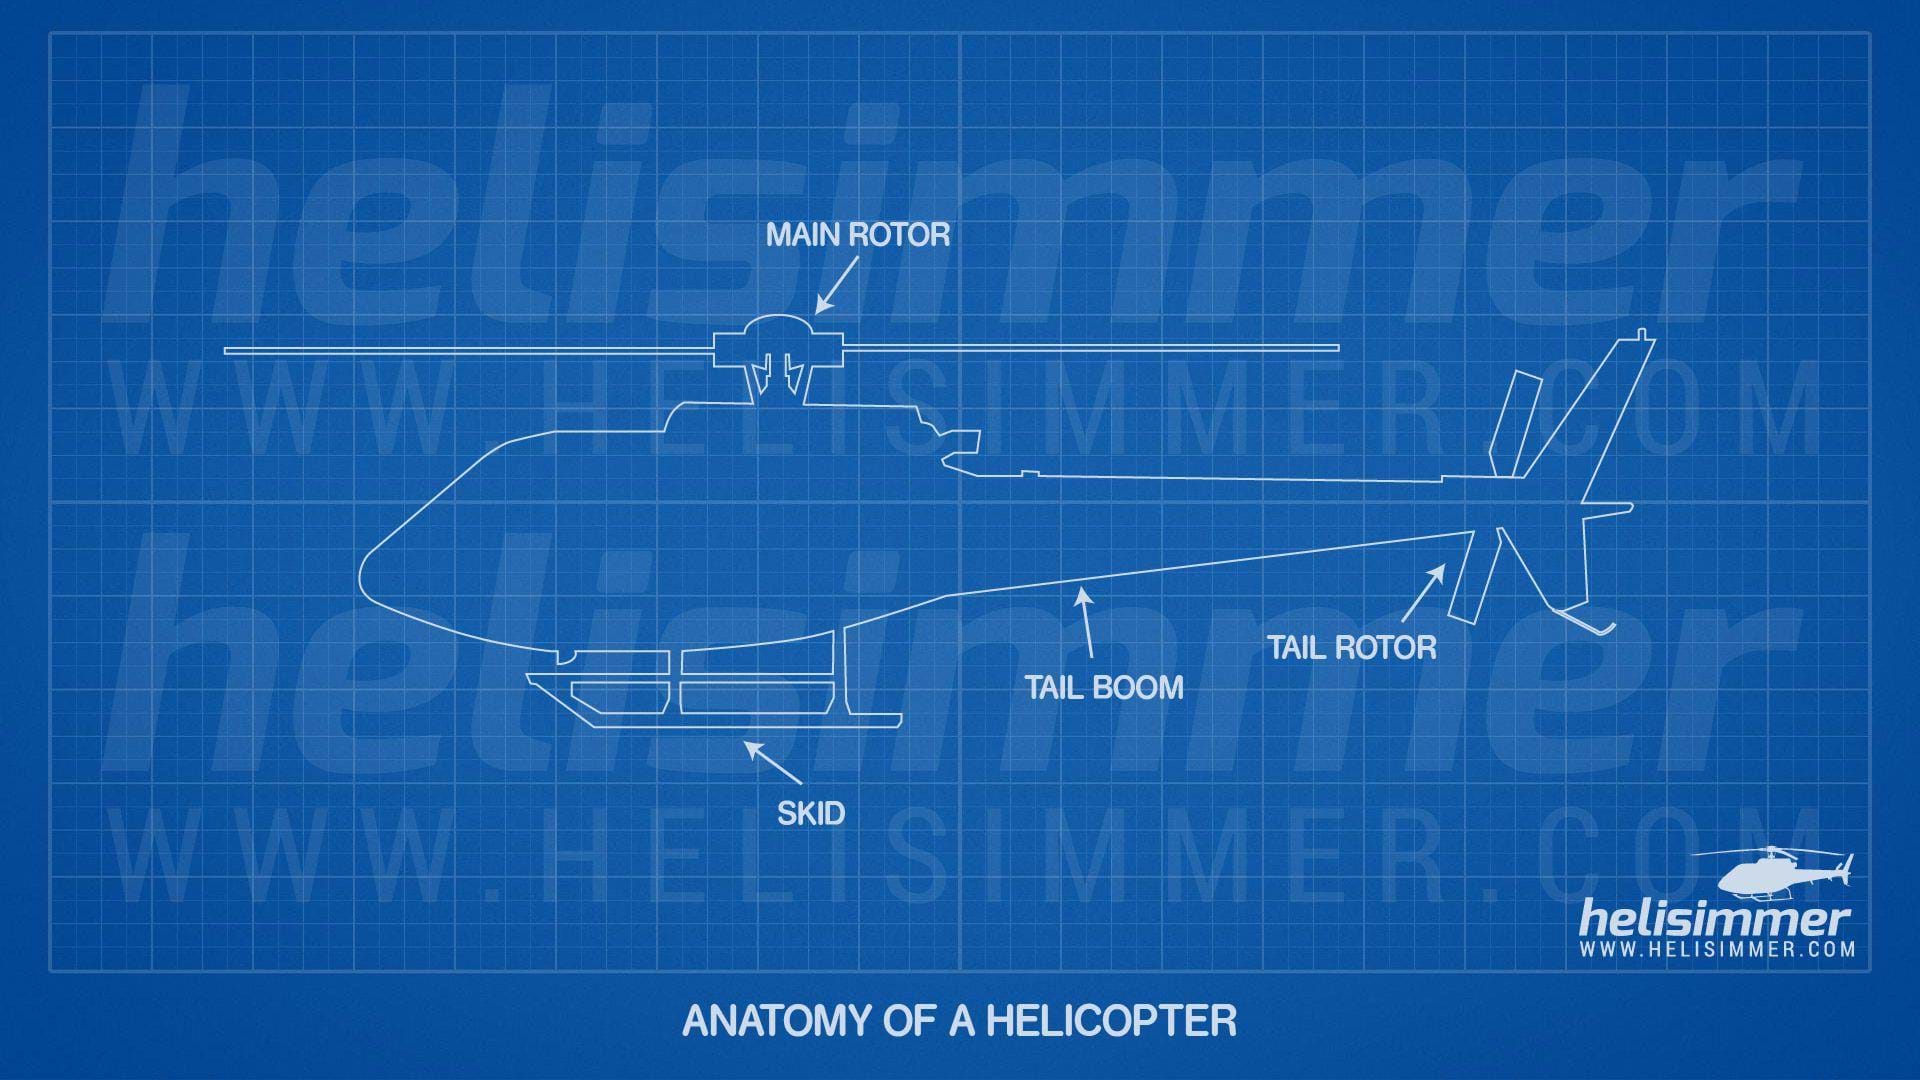 How to fly helicopters - anatomy of a helicopter